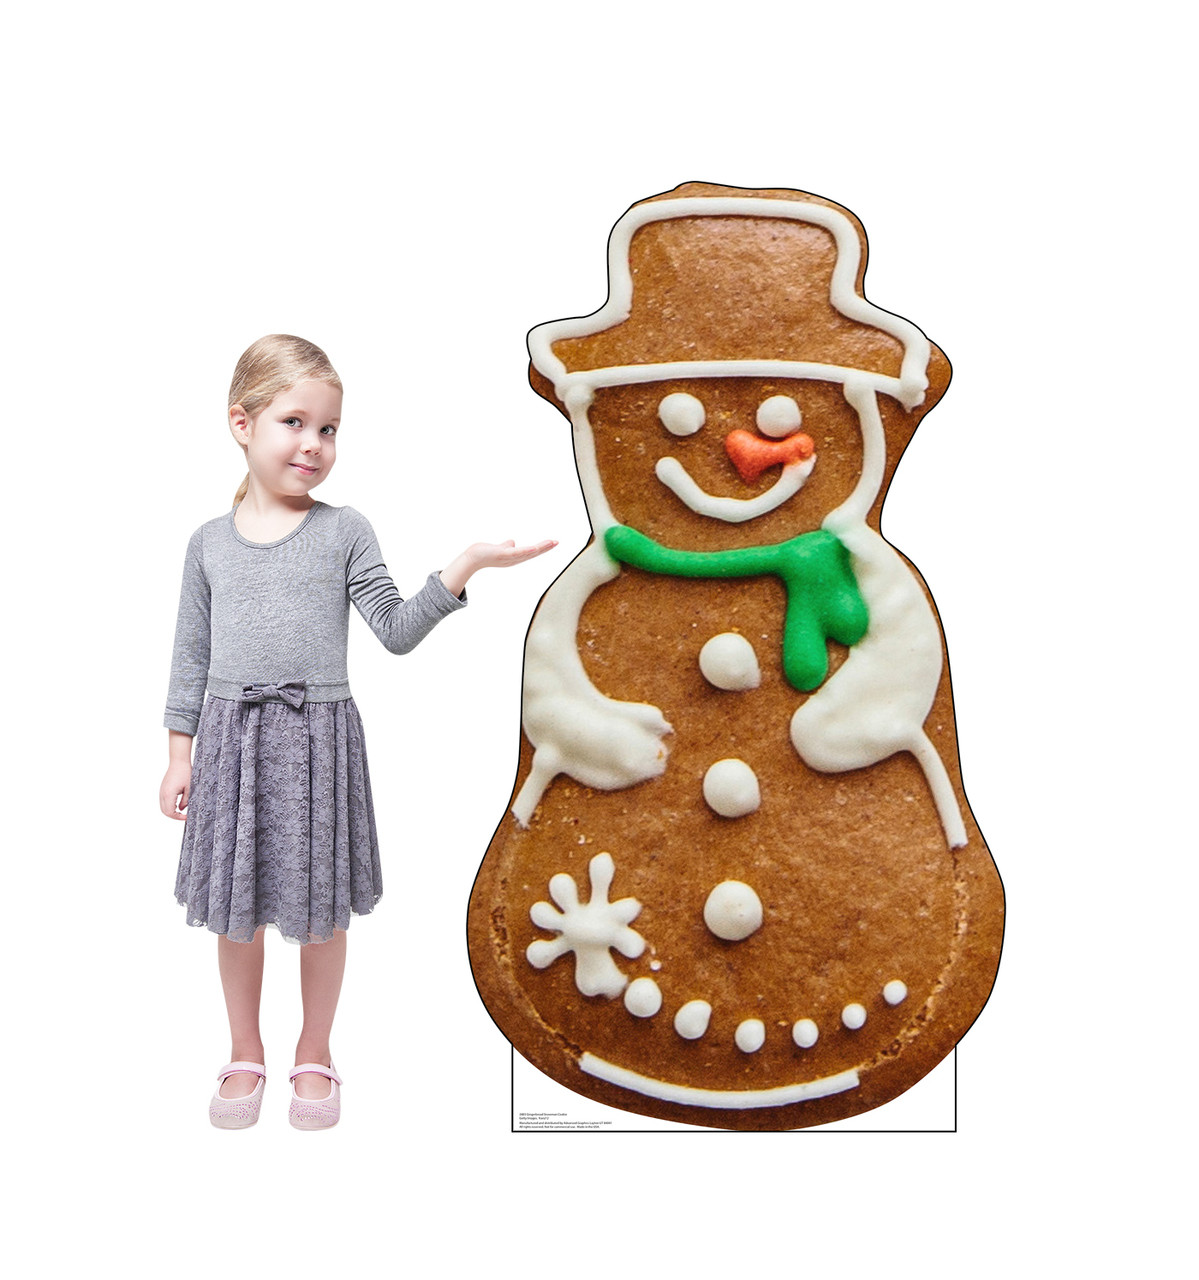 Life-size cardboard standee of Gingerbread Snowman Cookie with model.